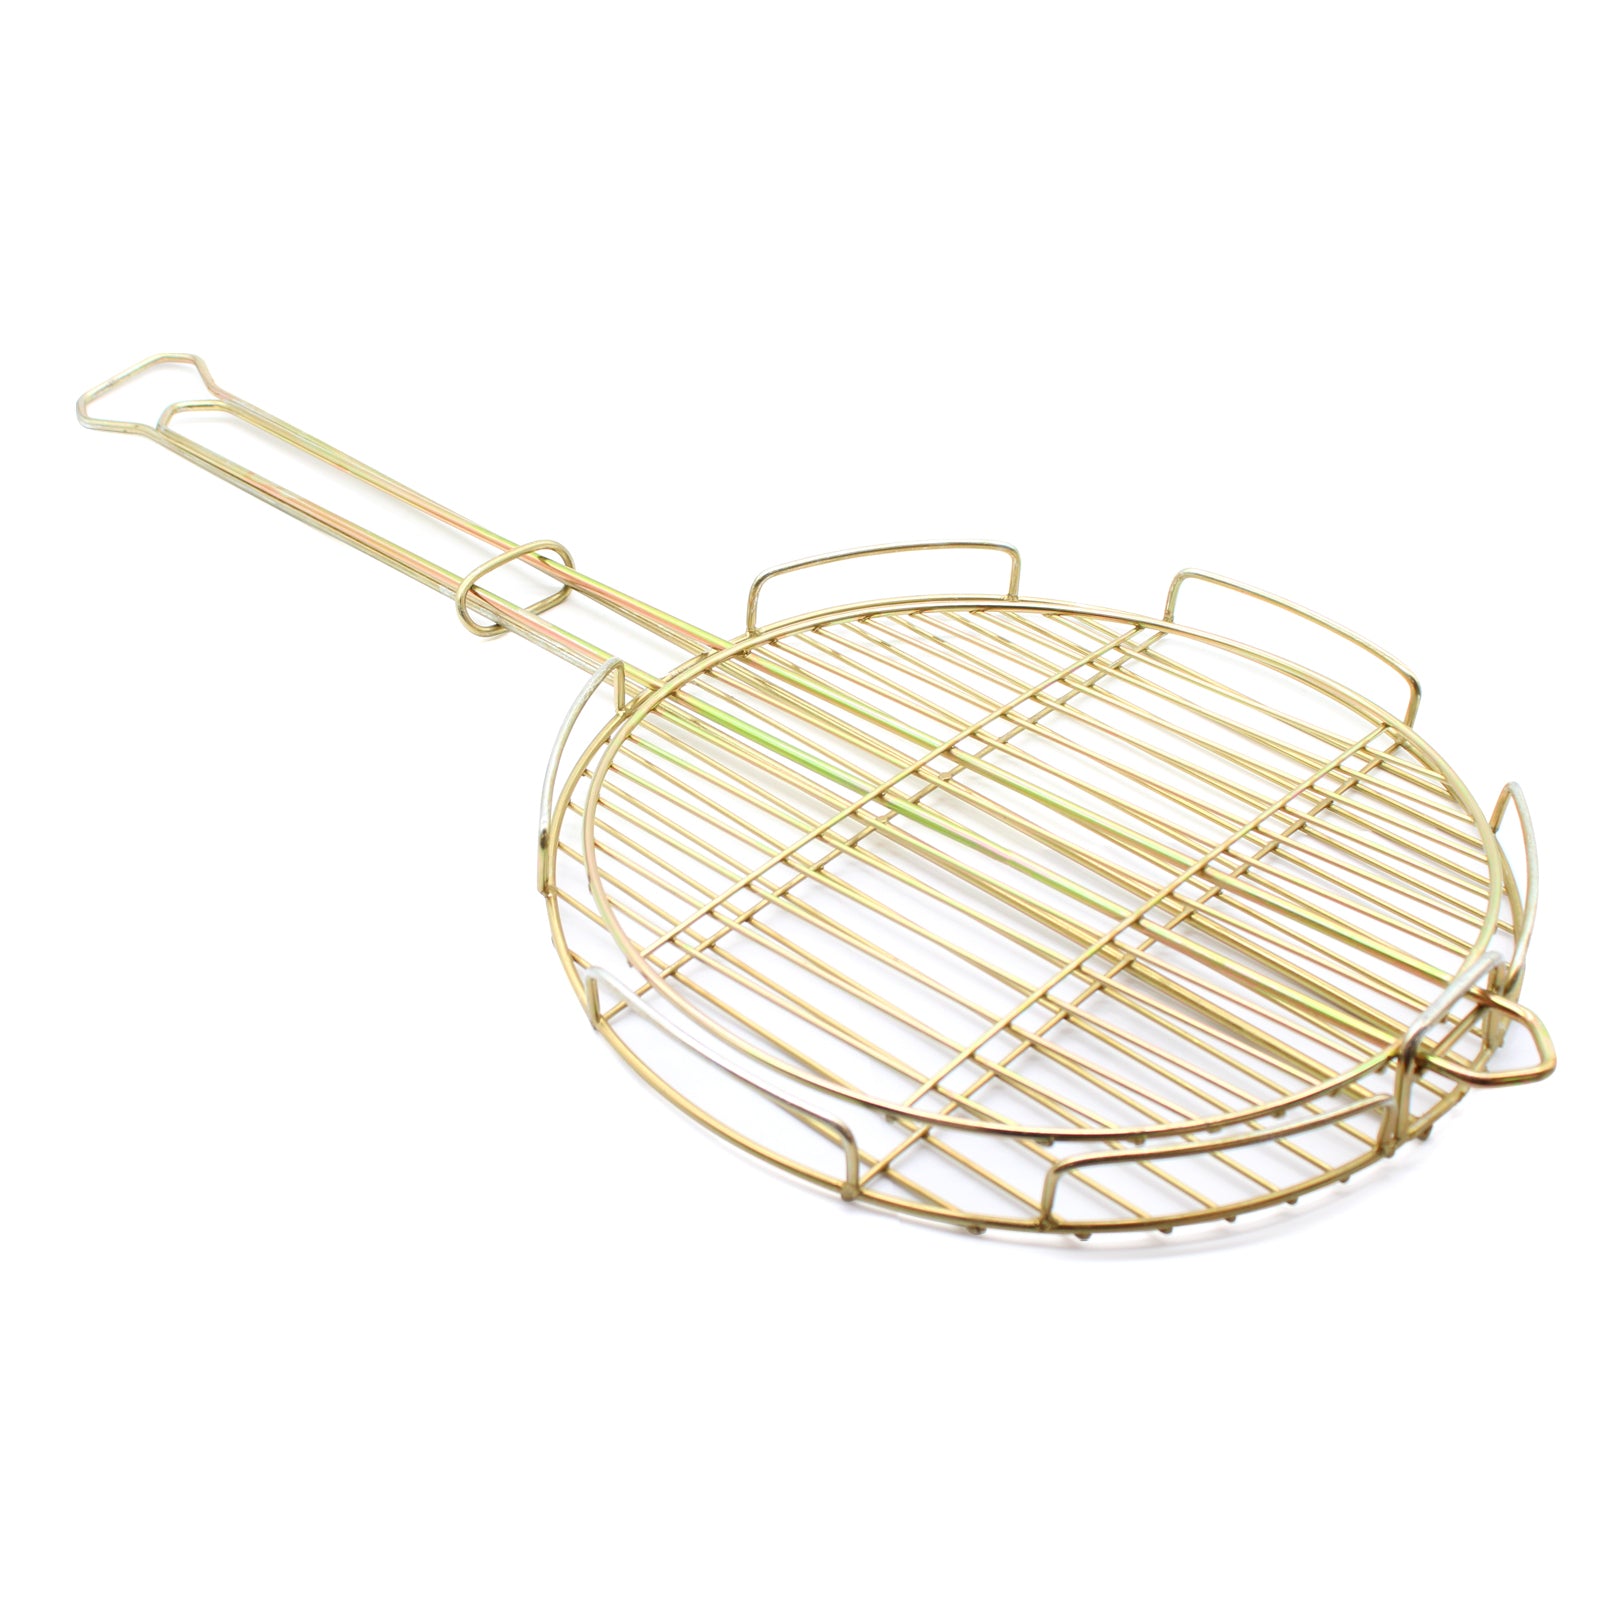 31cm Round Grid for Cooking over Braai, BBQ, Campfire